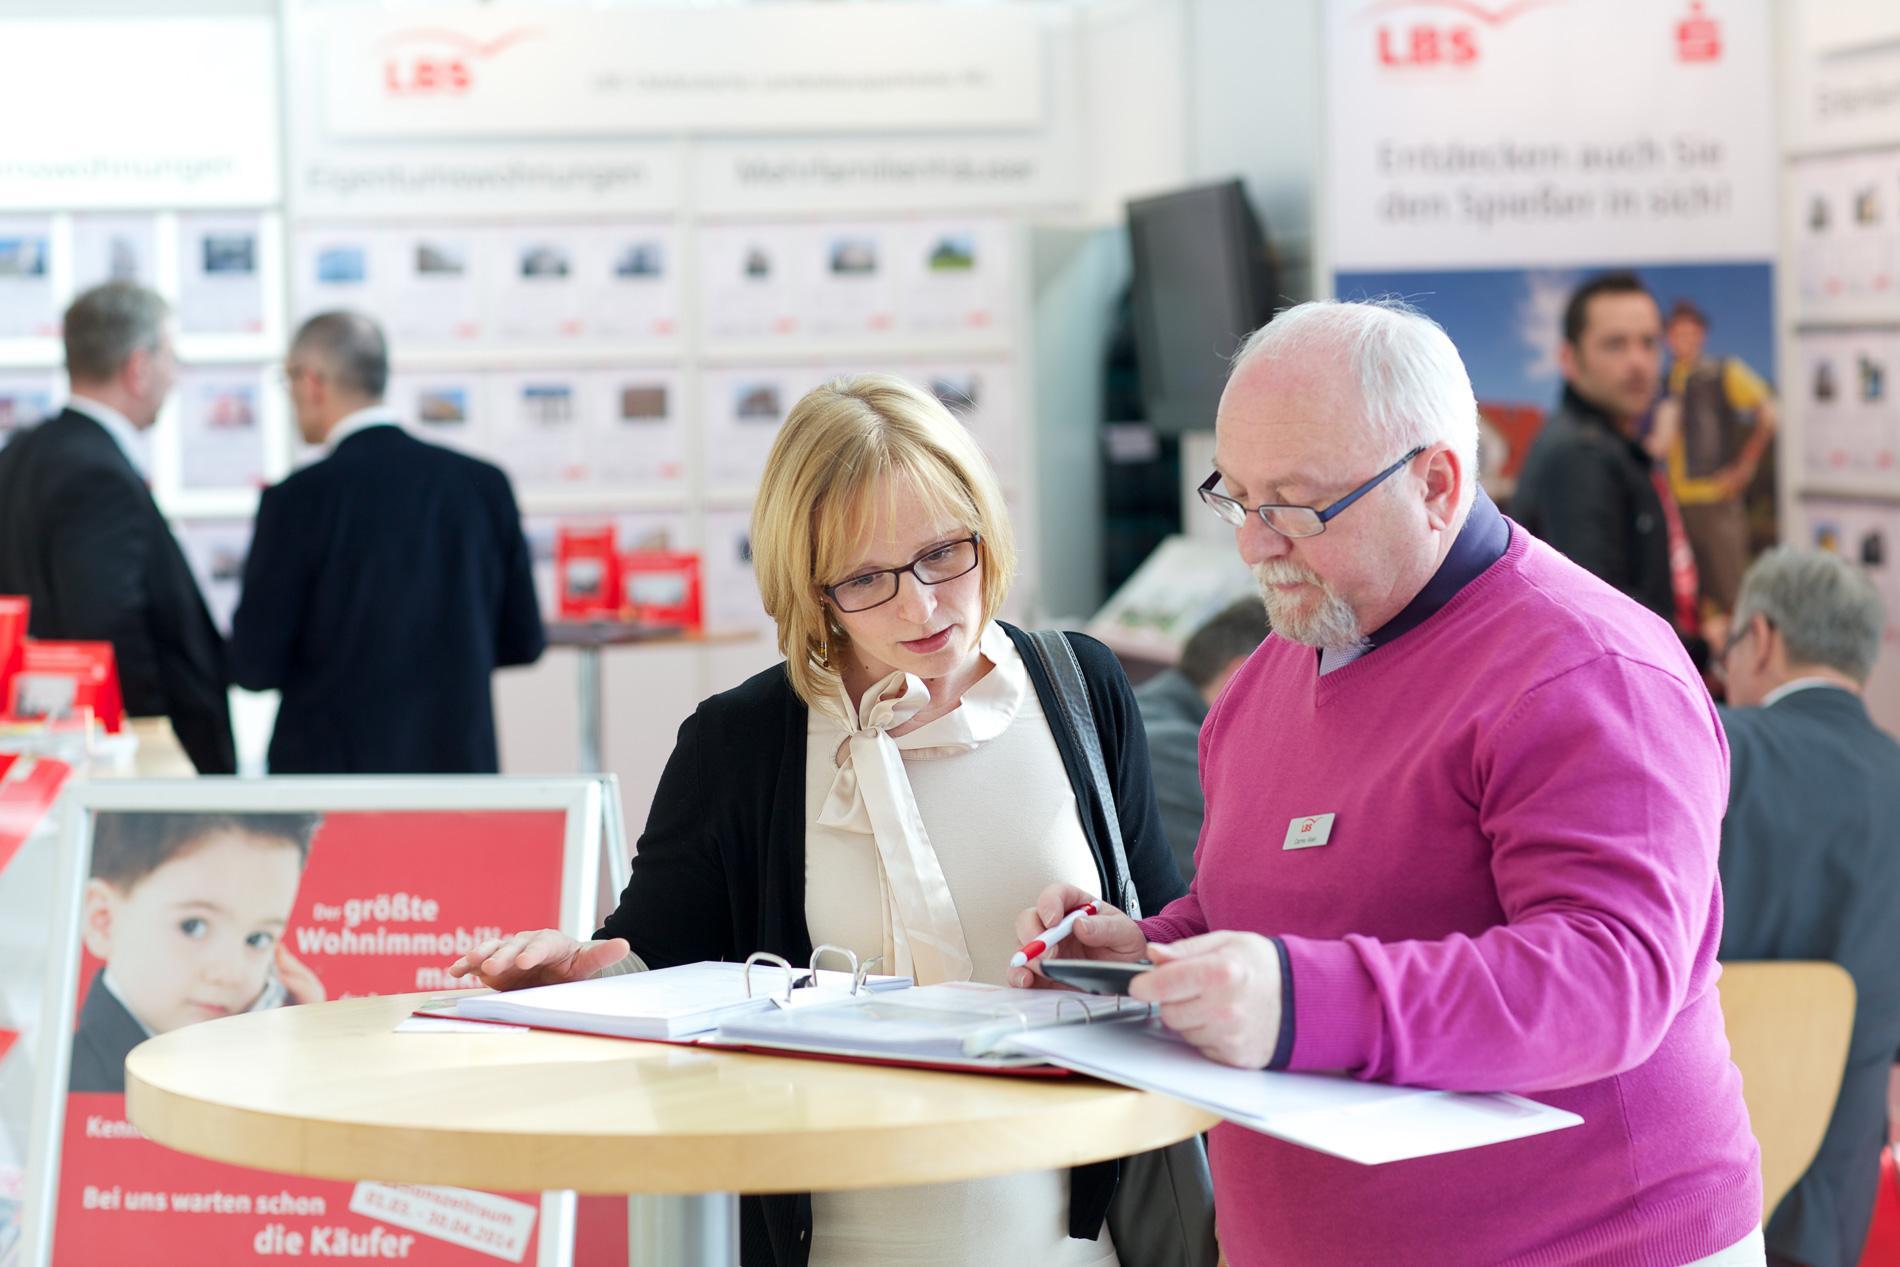 Leipziger Immobilienmesse 2014